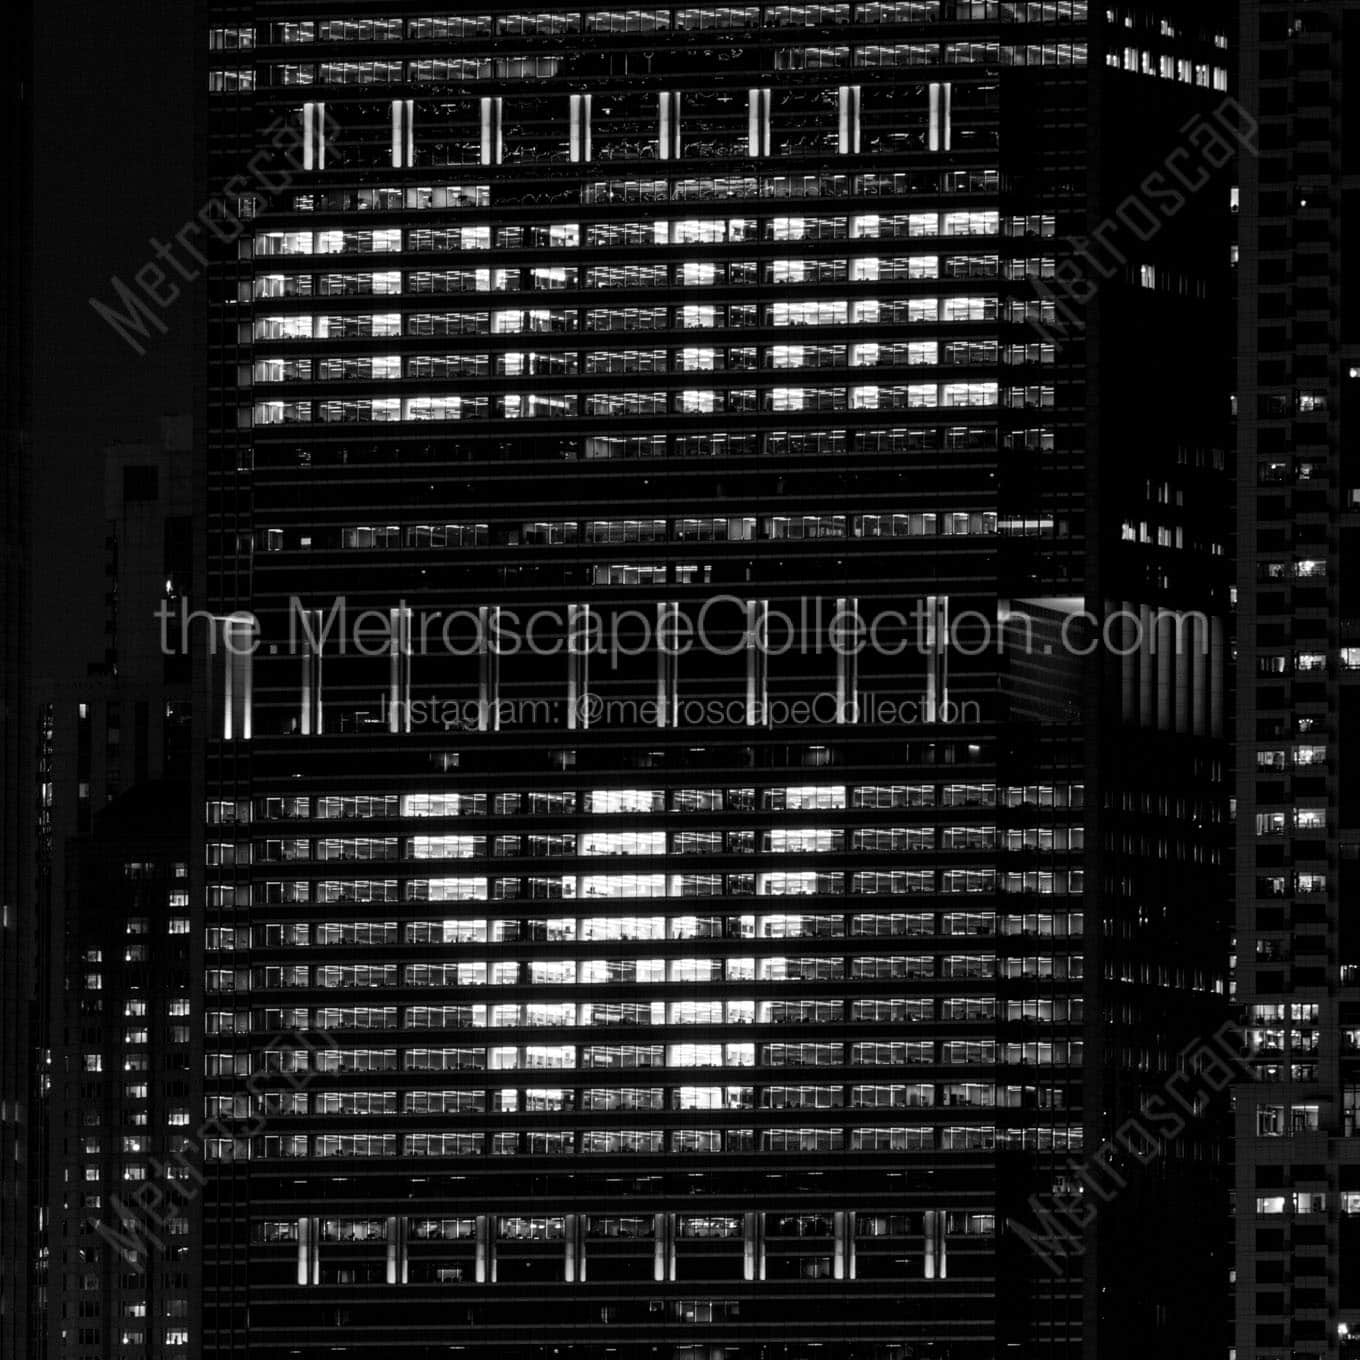 fly the w in anthem building at night Black & White Office Art